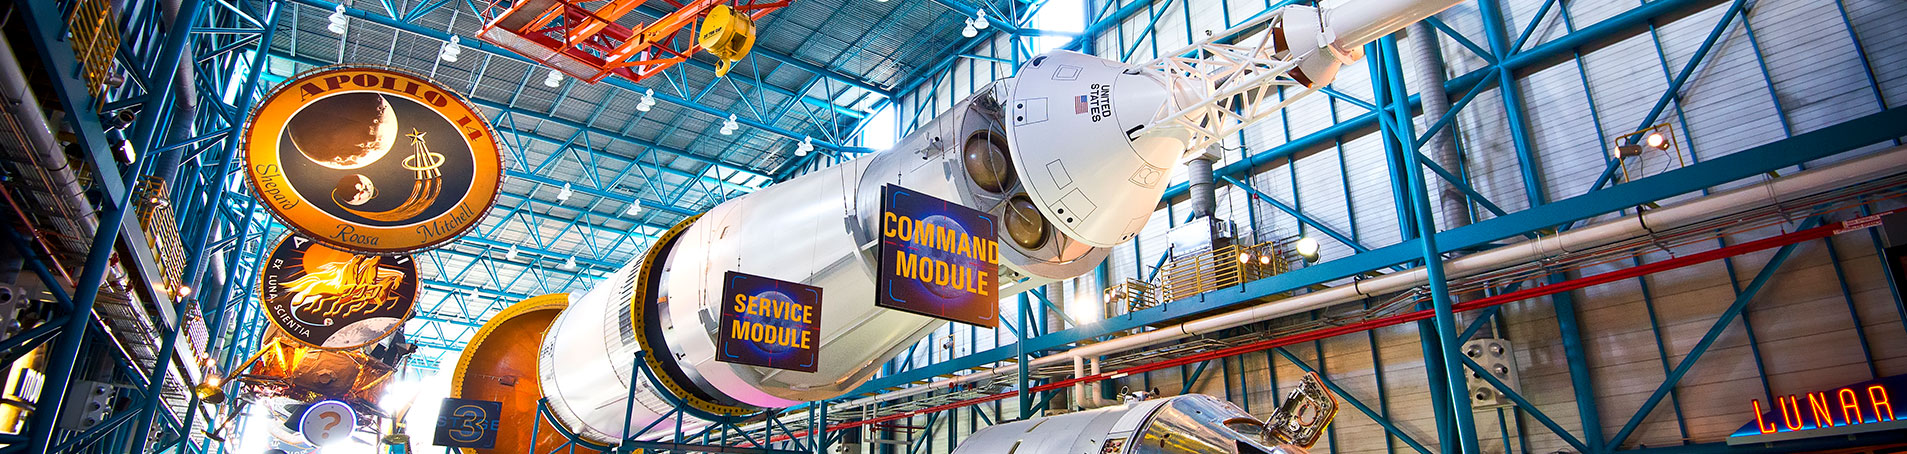 Host a unique private event at the Apollo / Saturn V Center, including dinner beneath a real moon rocket.